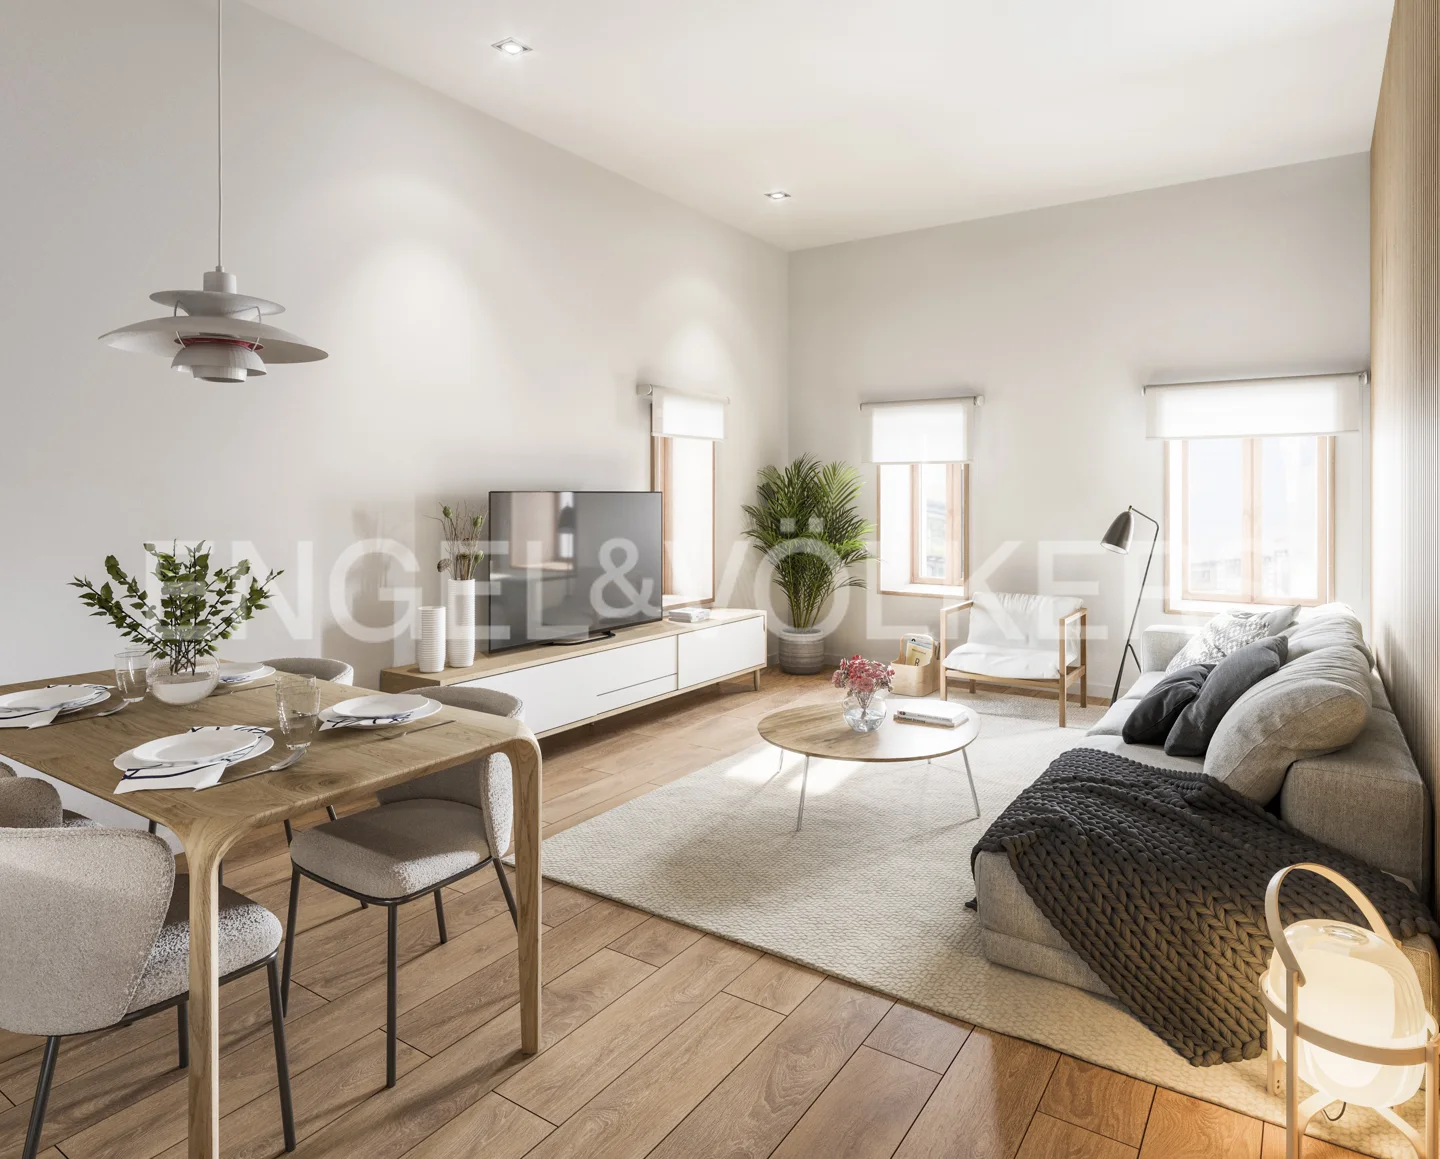 Magnificent brand new apartment in the center of Hondarribia